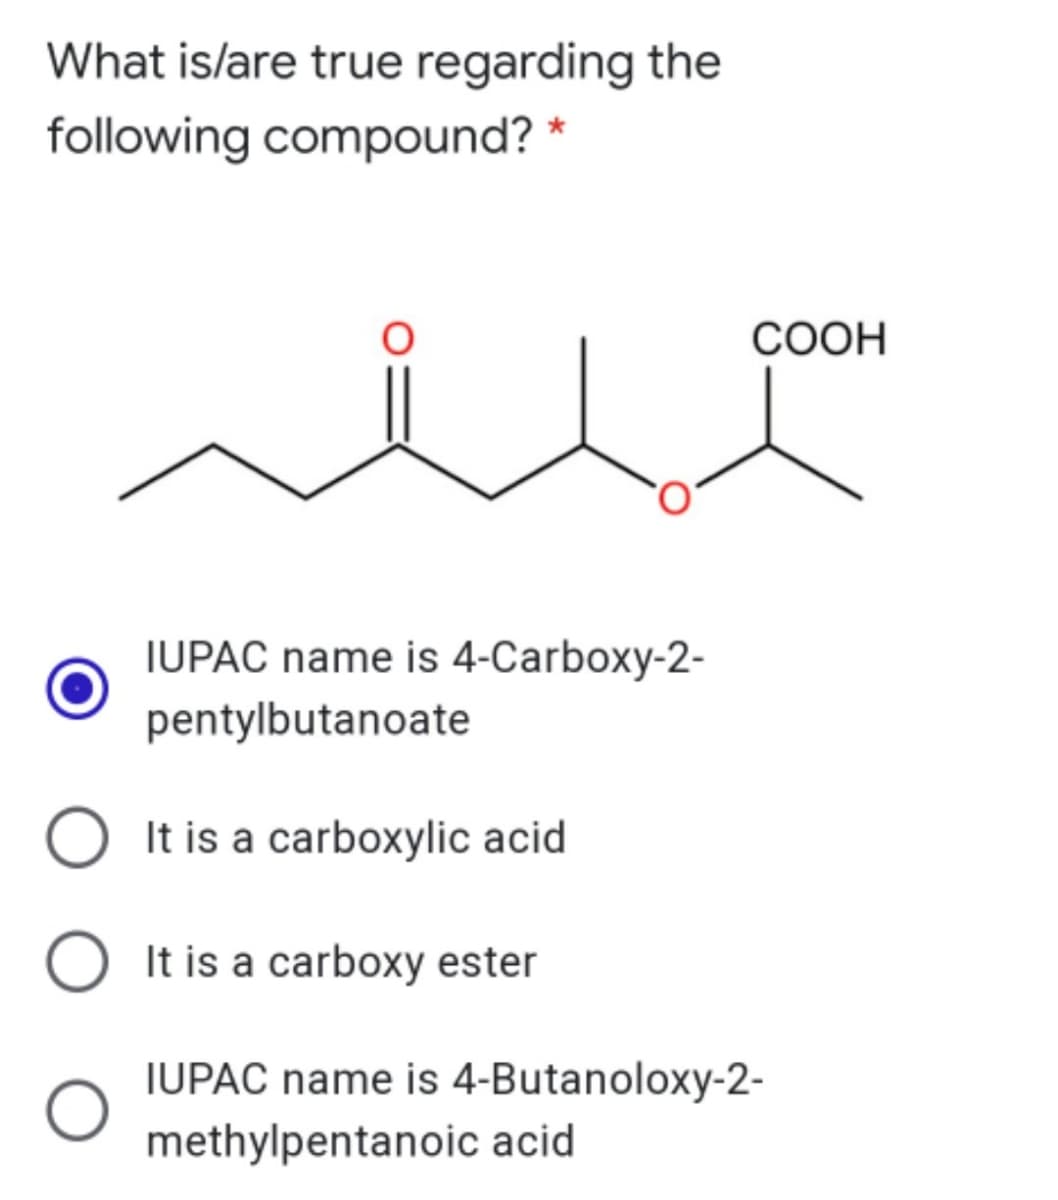 What is/are true regarding the
following compound? *
COOH
IUPAC name is 4-Carboxy-2-
pentylbutanoate
It is a carboxylic acid
It is a carboxy ester
IUPAC name is 4-Butanoloxy-2-
methylpentanoic acid
